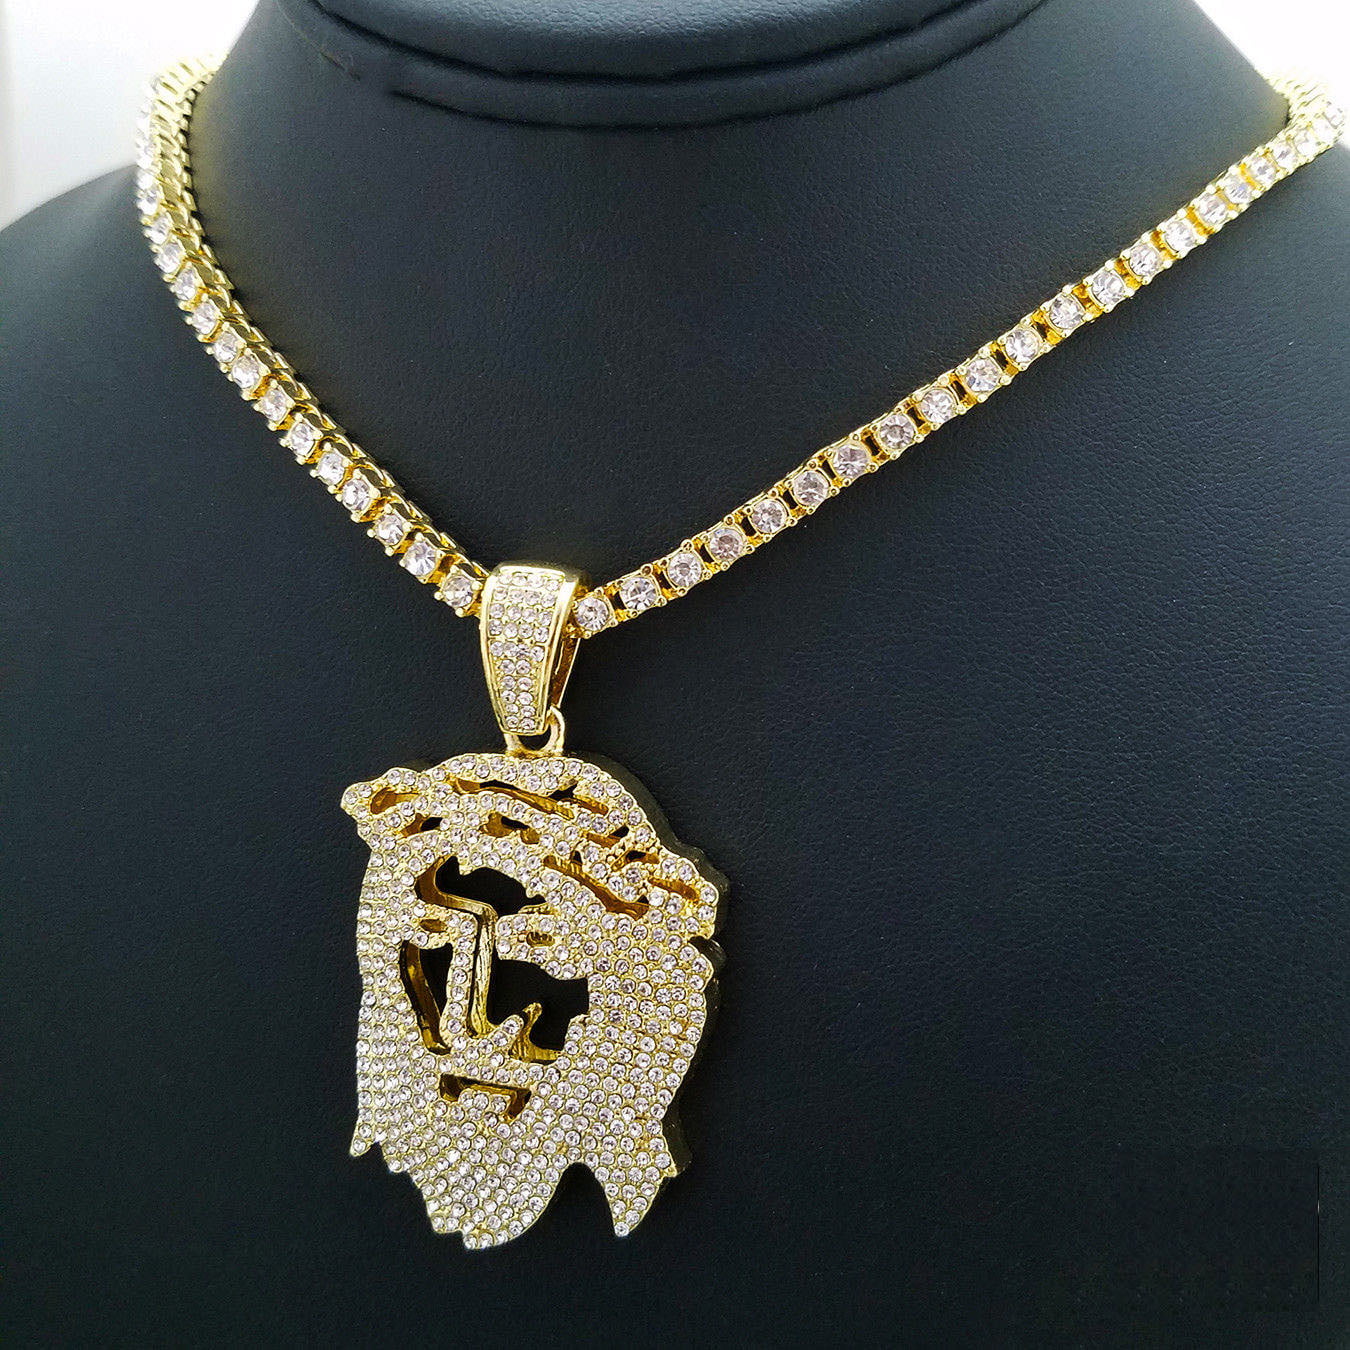 ICED Jesus Pendant & Tennis Choker Chain Necklace Gold Plated Men HipHop Jewelry 